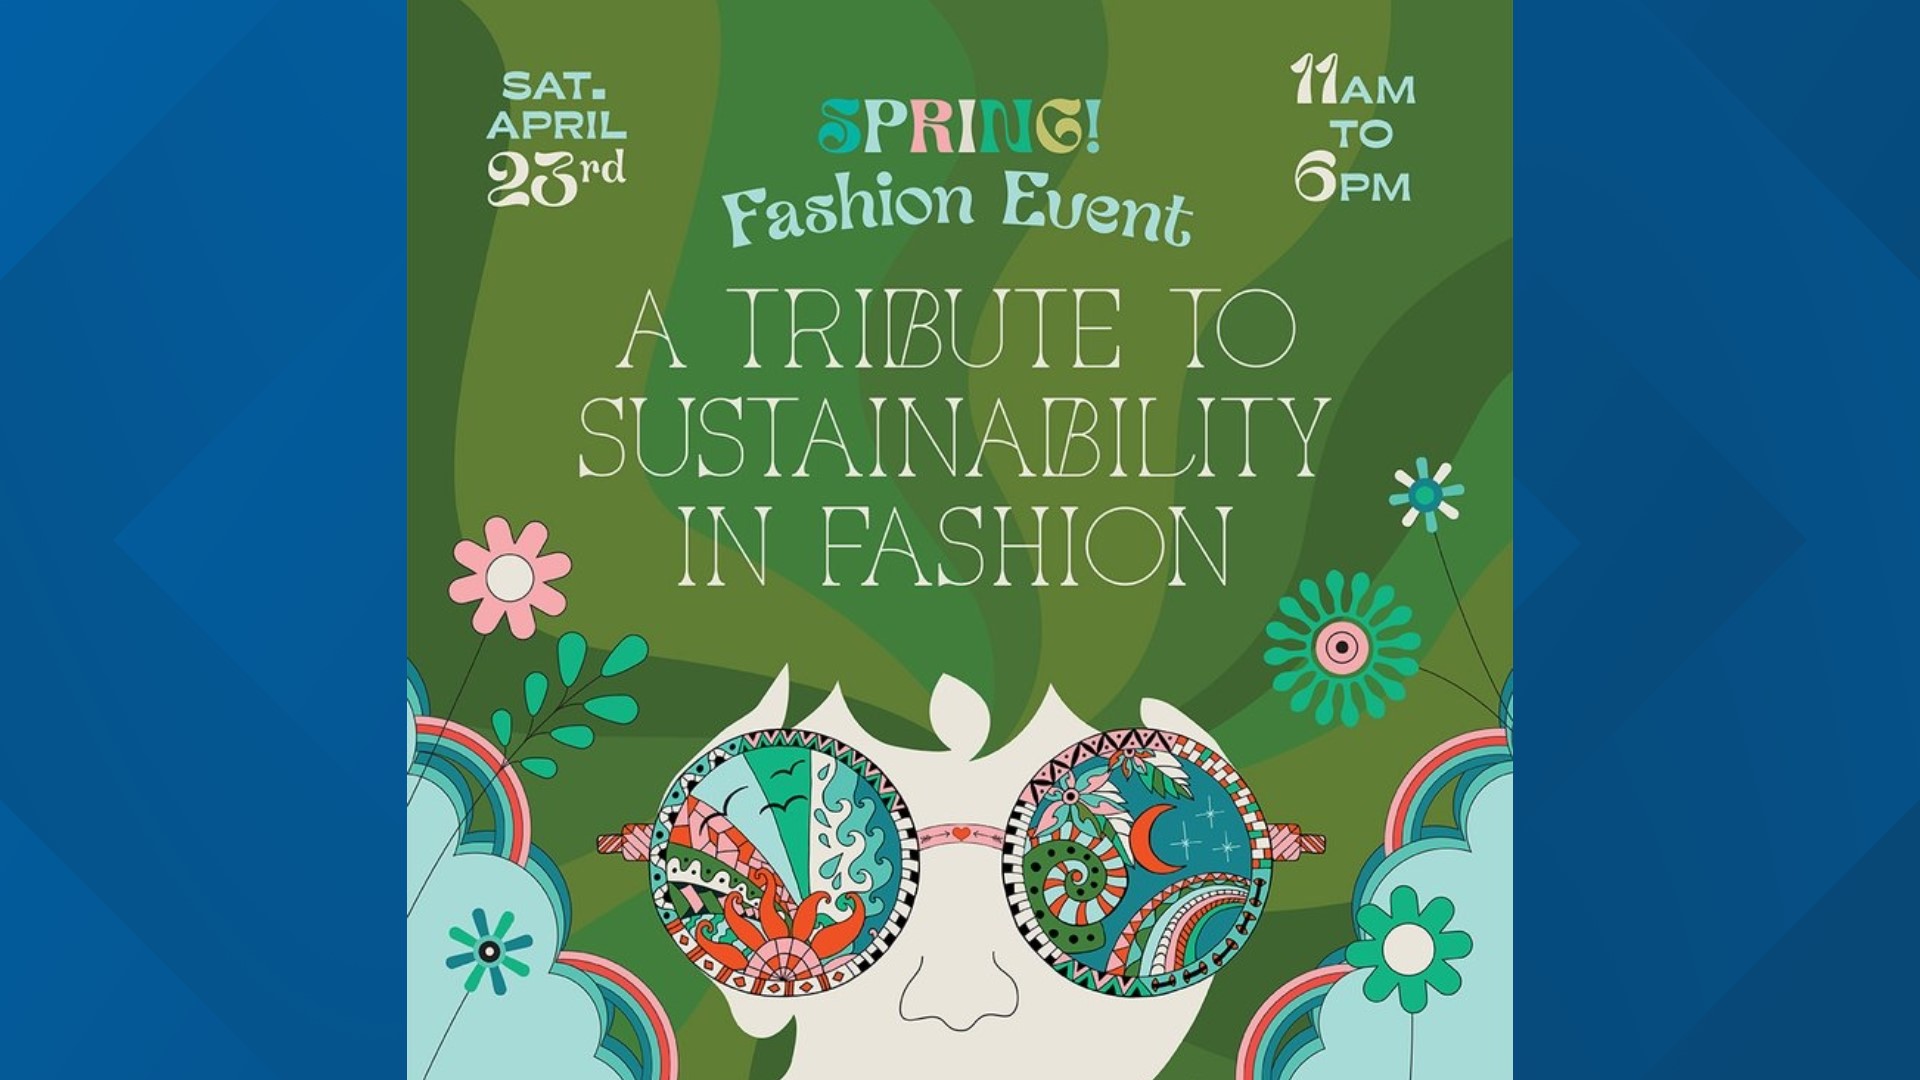 The 2022 spring fashion event at U Village is "A Tribute to Sustainability." The event runs from 11 a.m. to 4 p.m. on Saturday, April 23.